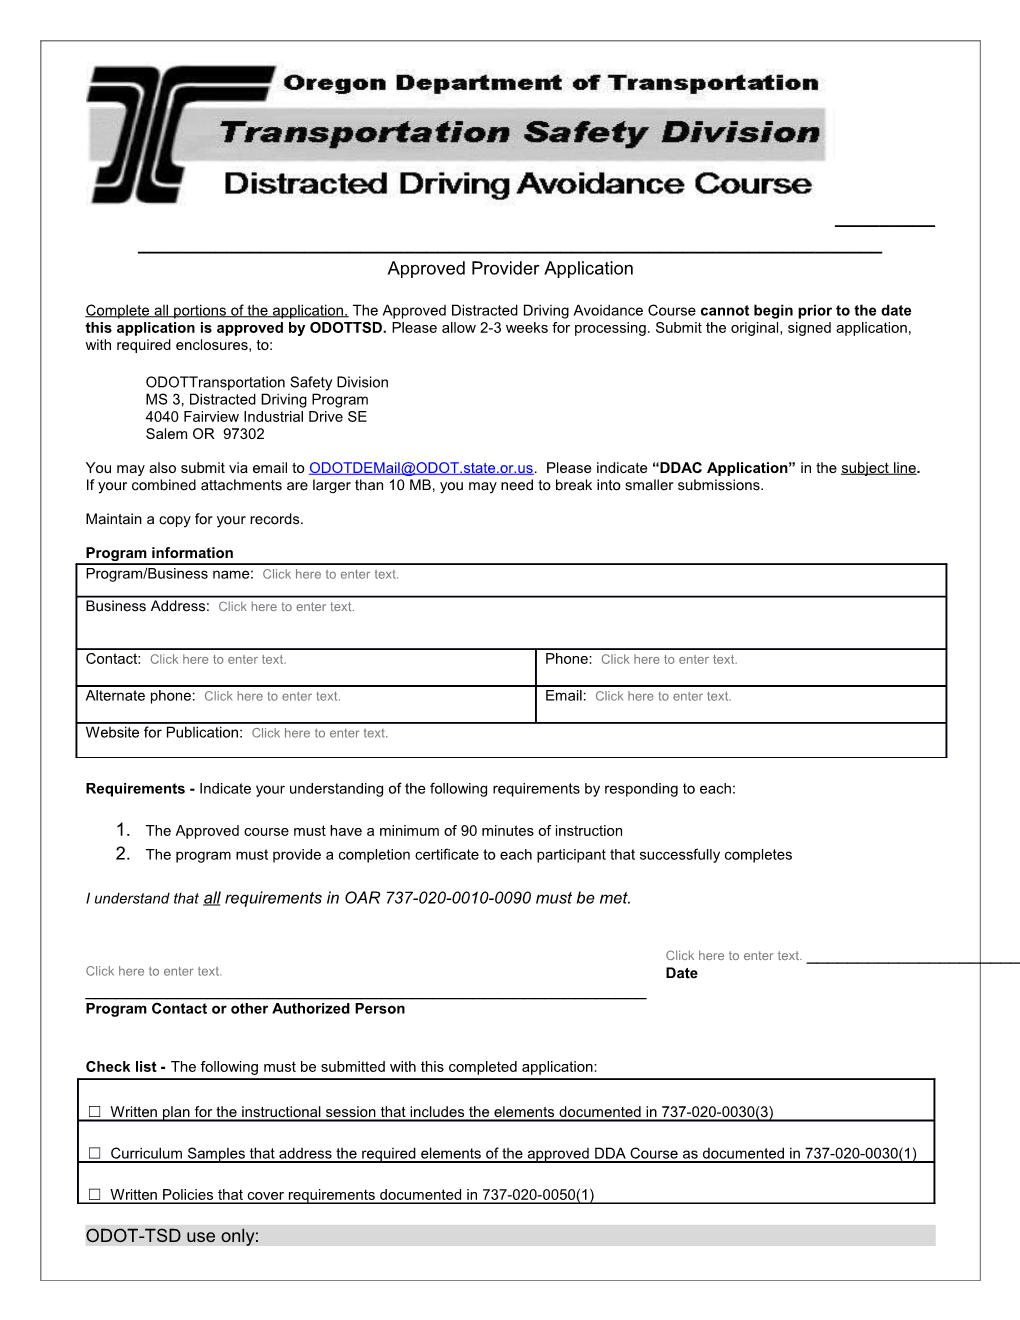 Distracted Driving Avoidance Course Provider Application